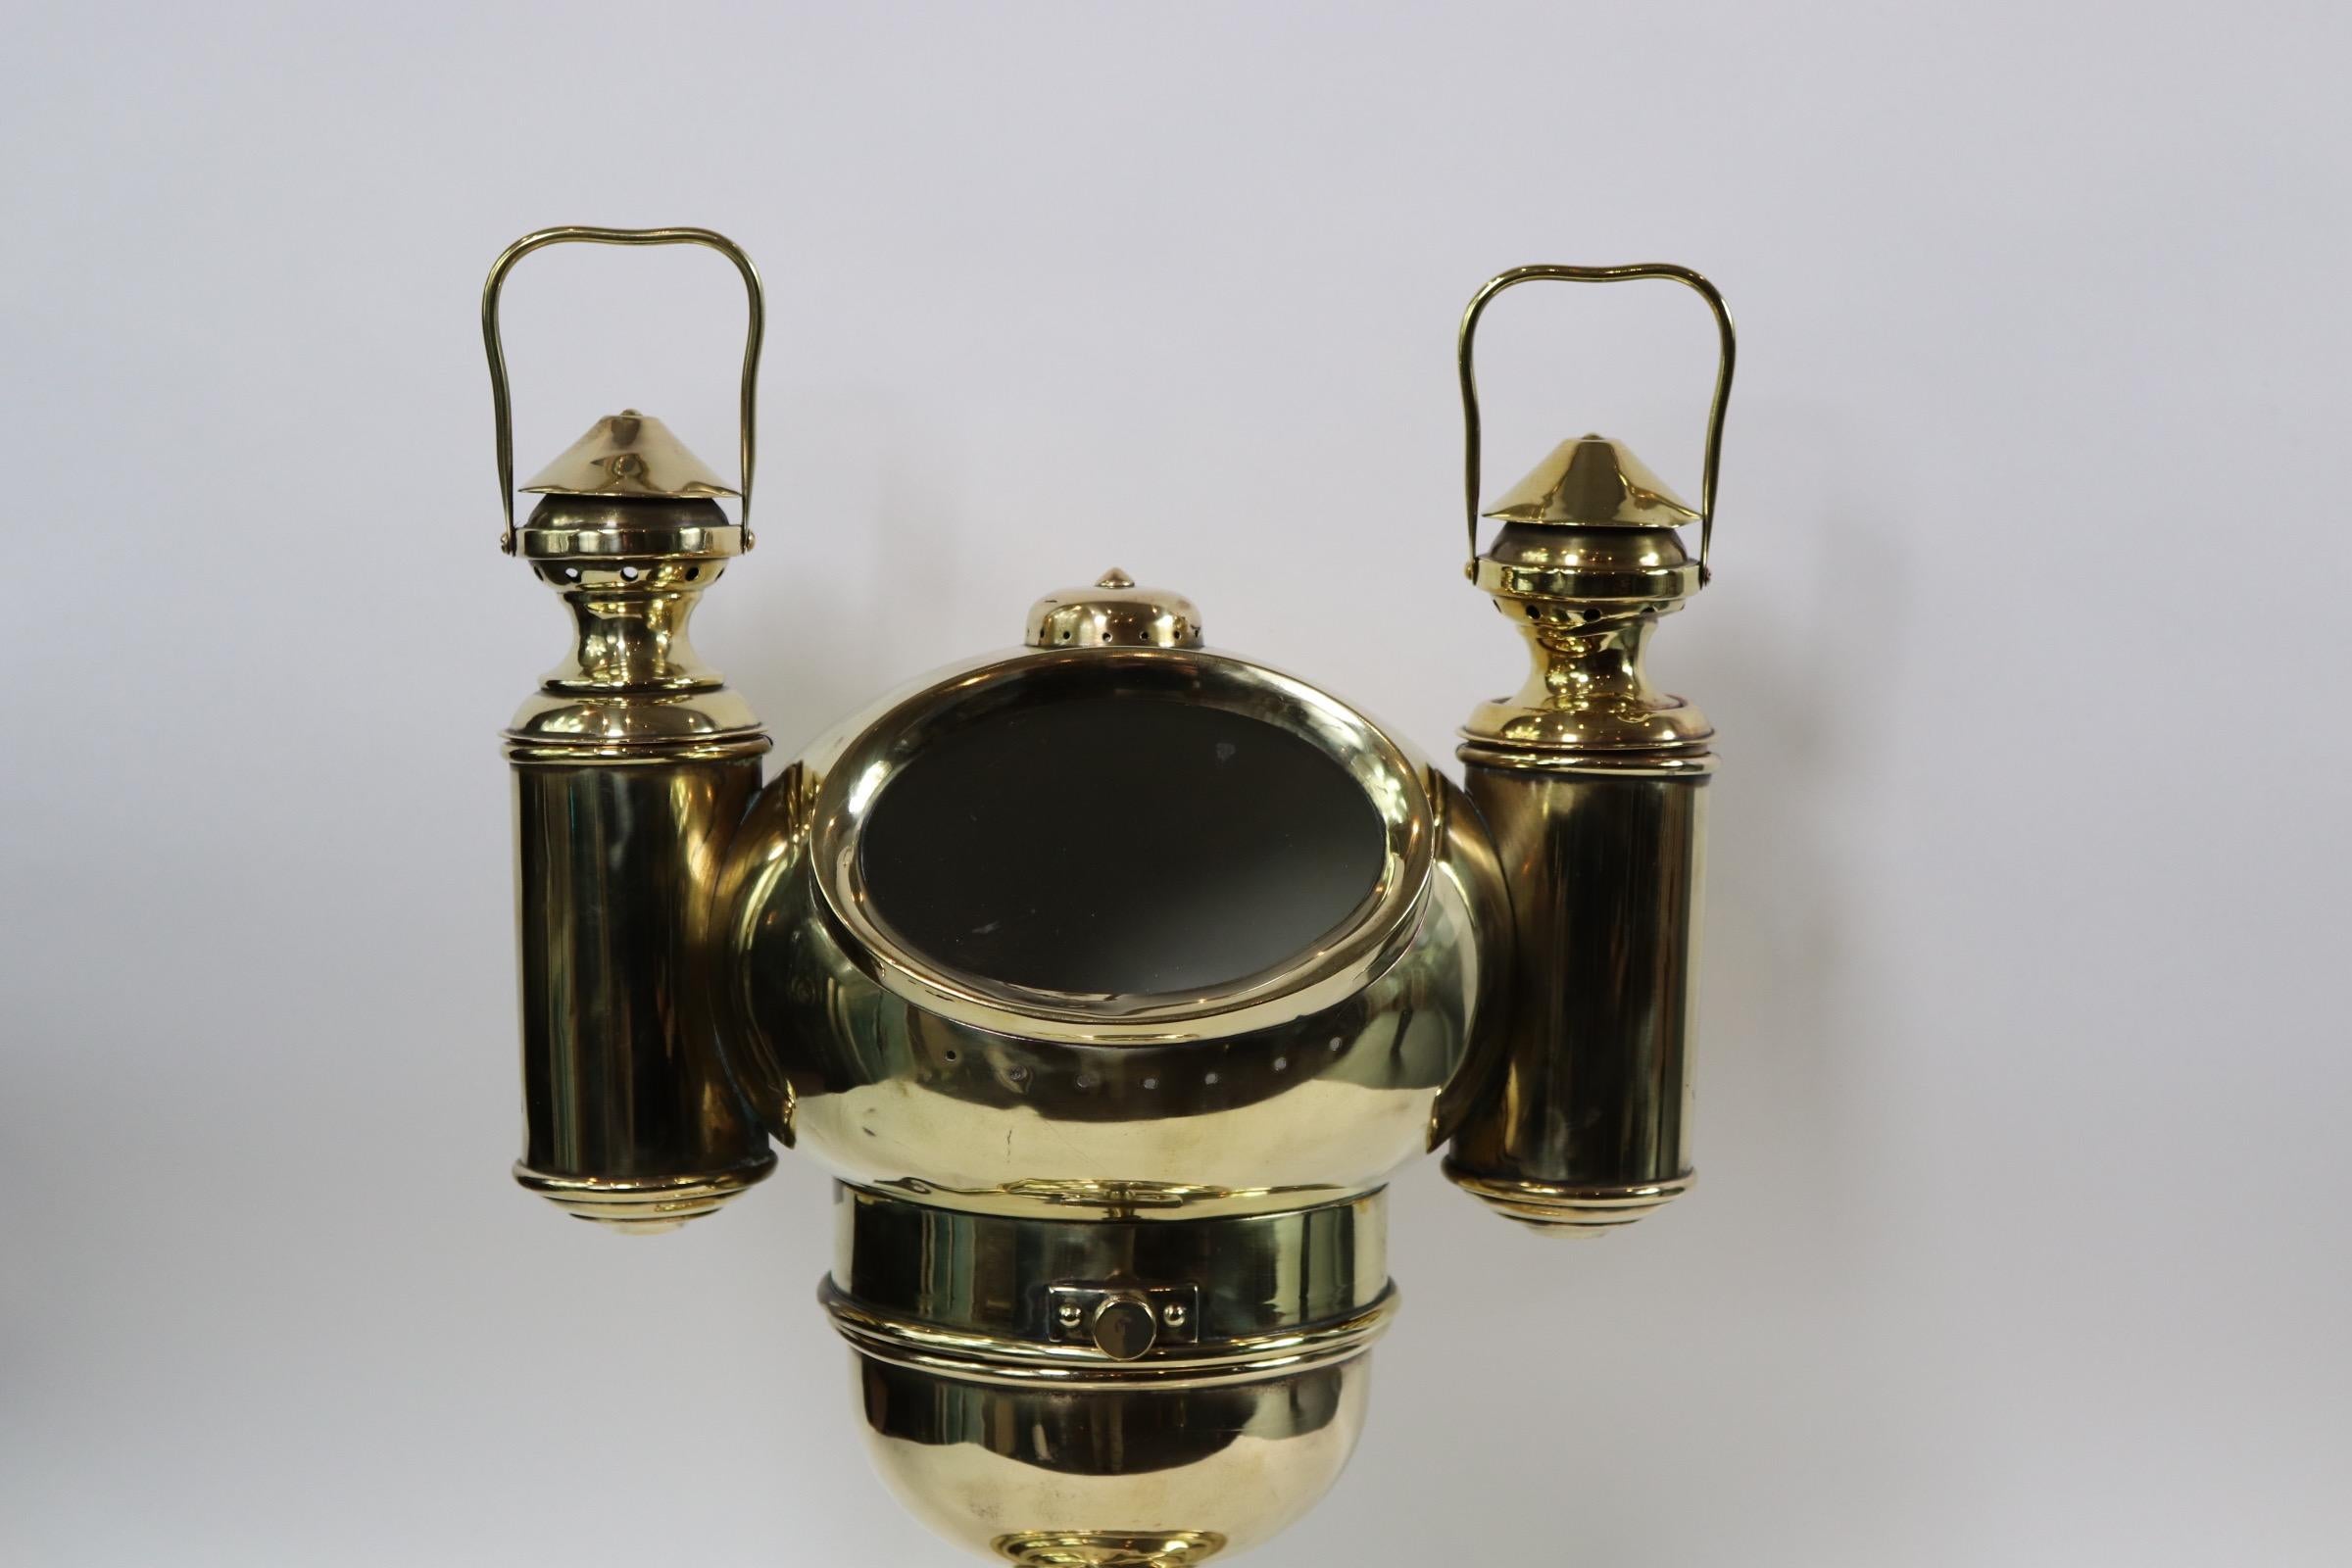 Polished brass yacht binnacle with gimballed compass by Dirigo. Compass is also polished. Mushroom style top with twin burners. Awesome relic. Weight is 14 pounds. X-117